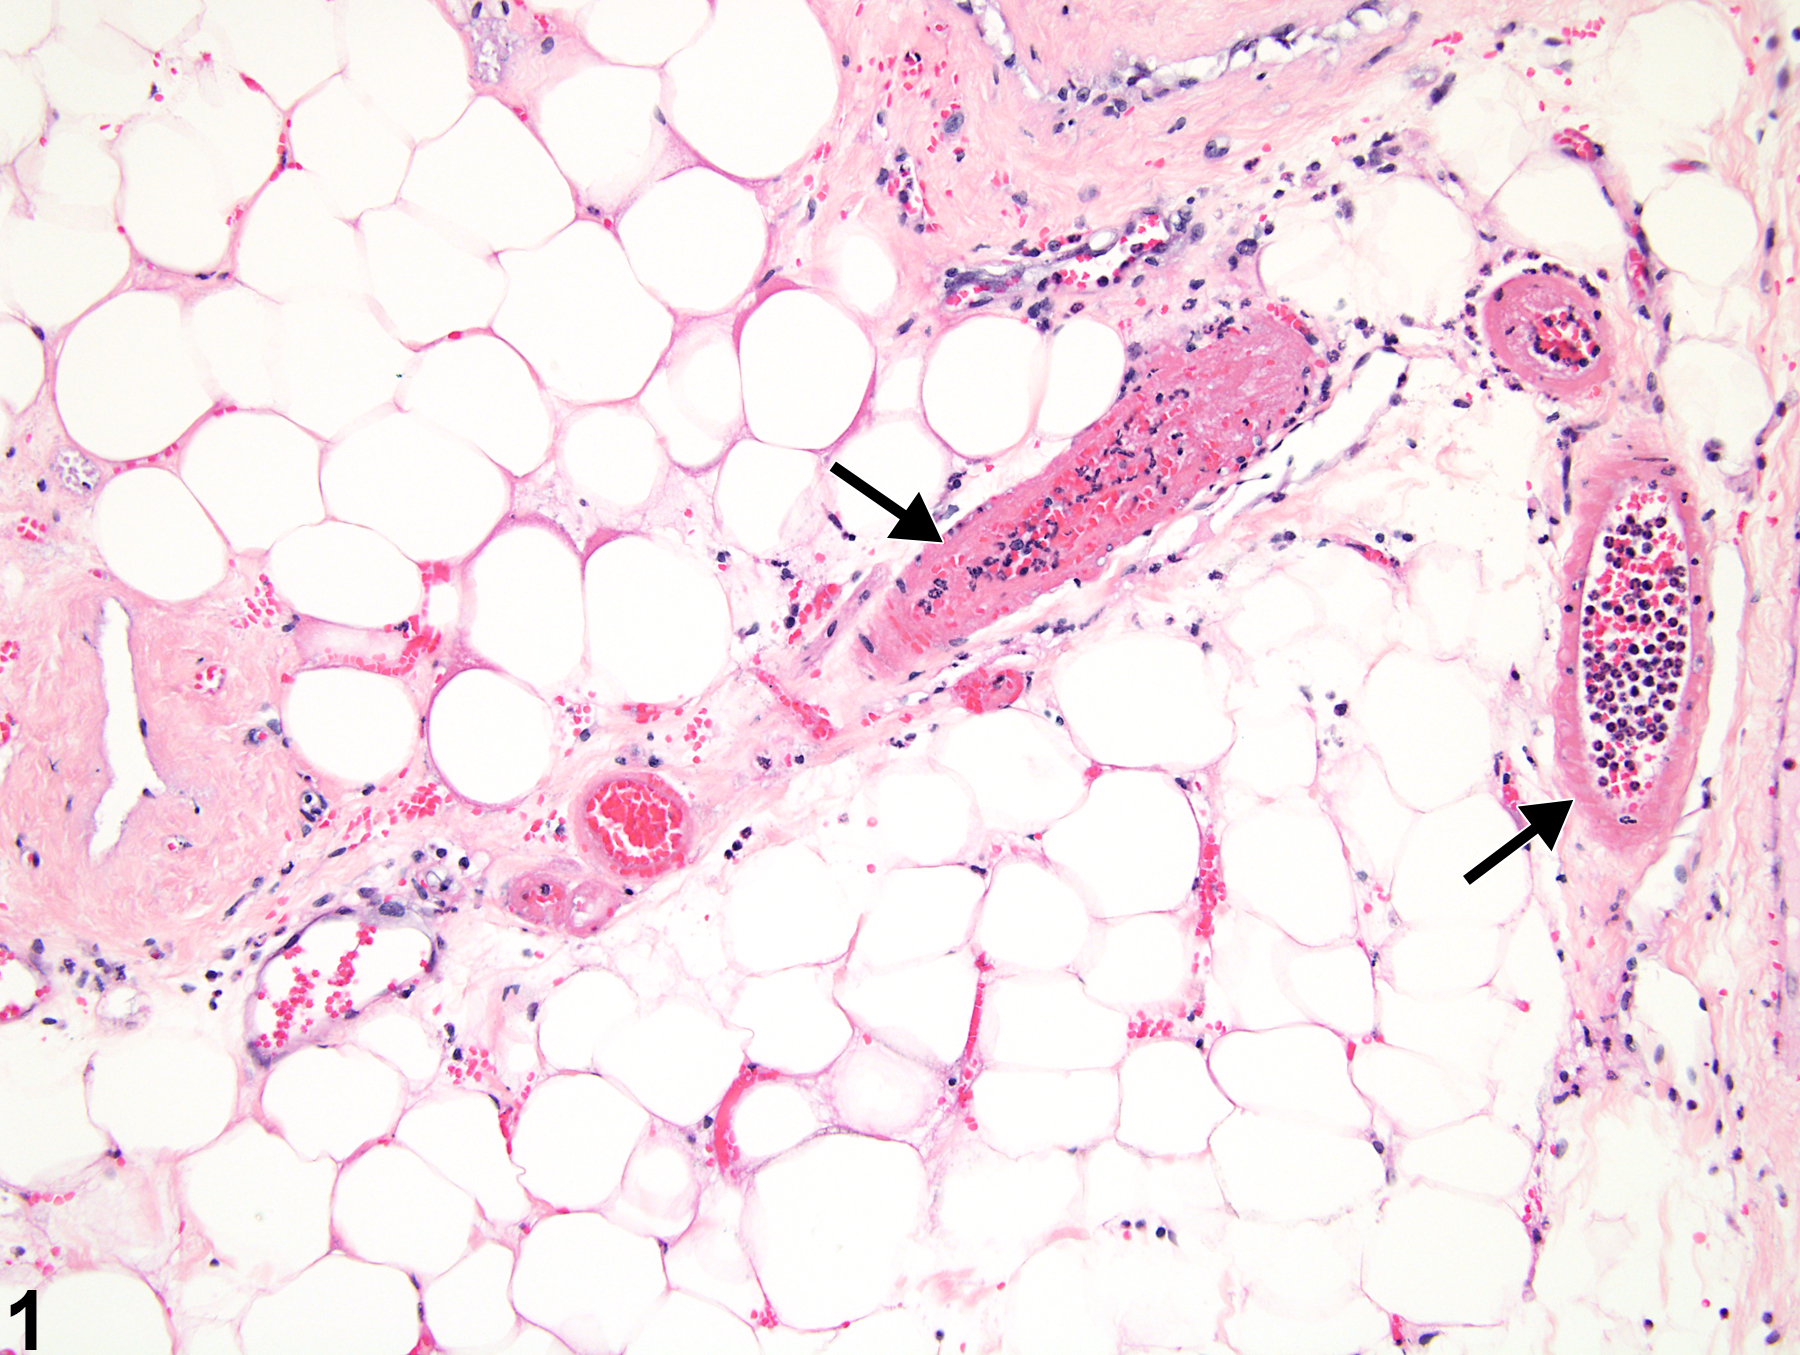 Image of necrosis in the mammary gland, arteriole from a female F344/N rat in a chronic study